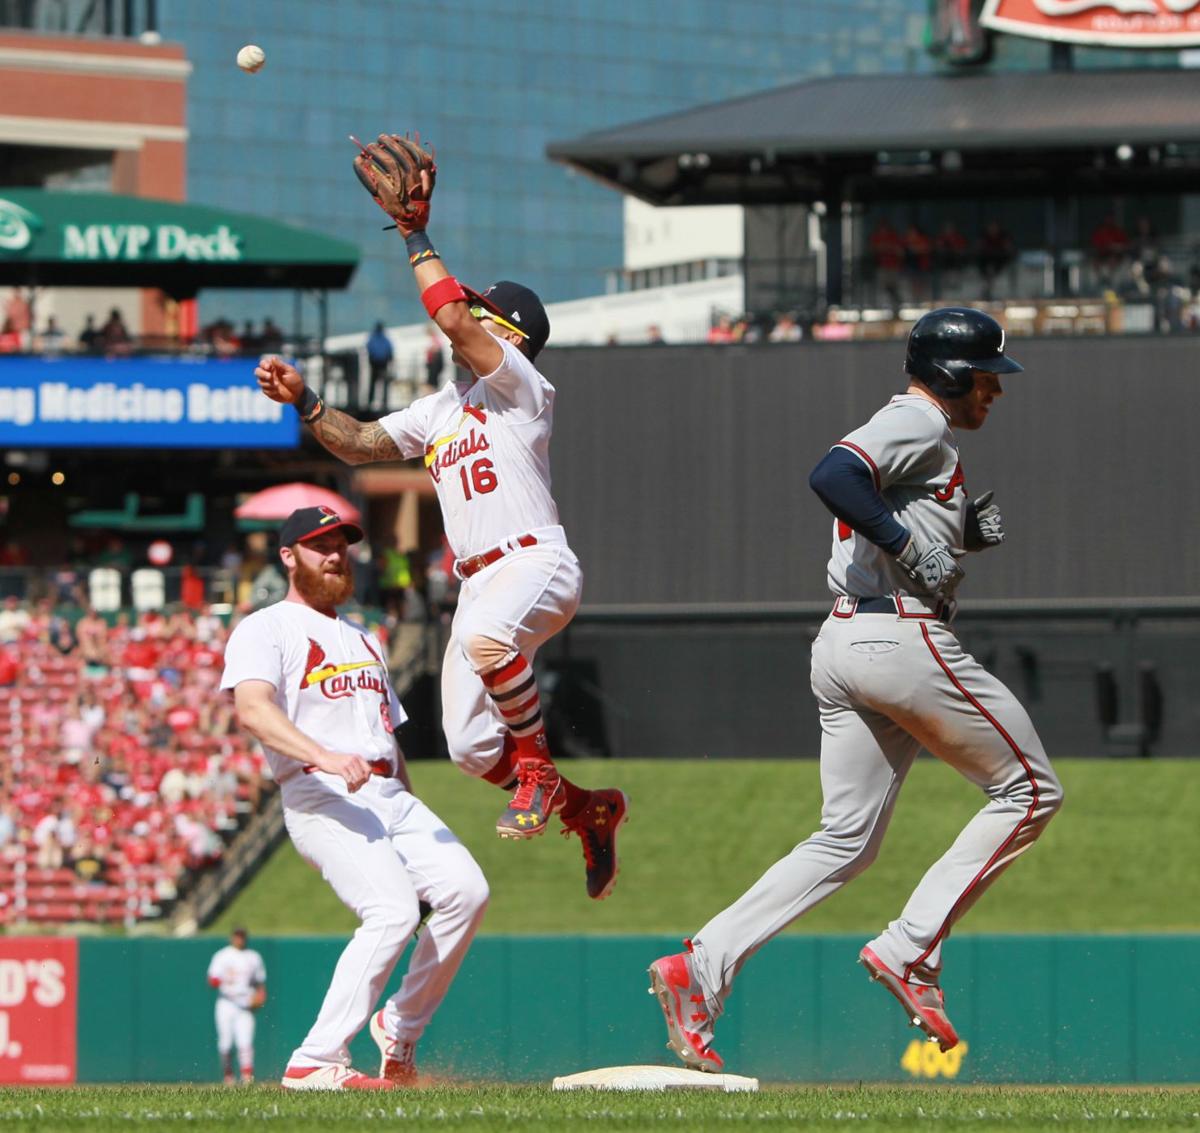 Cards end winning streak with 63 loss to Braves St. Louis Cardinals